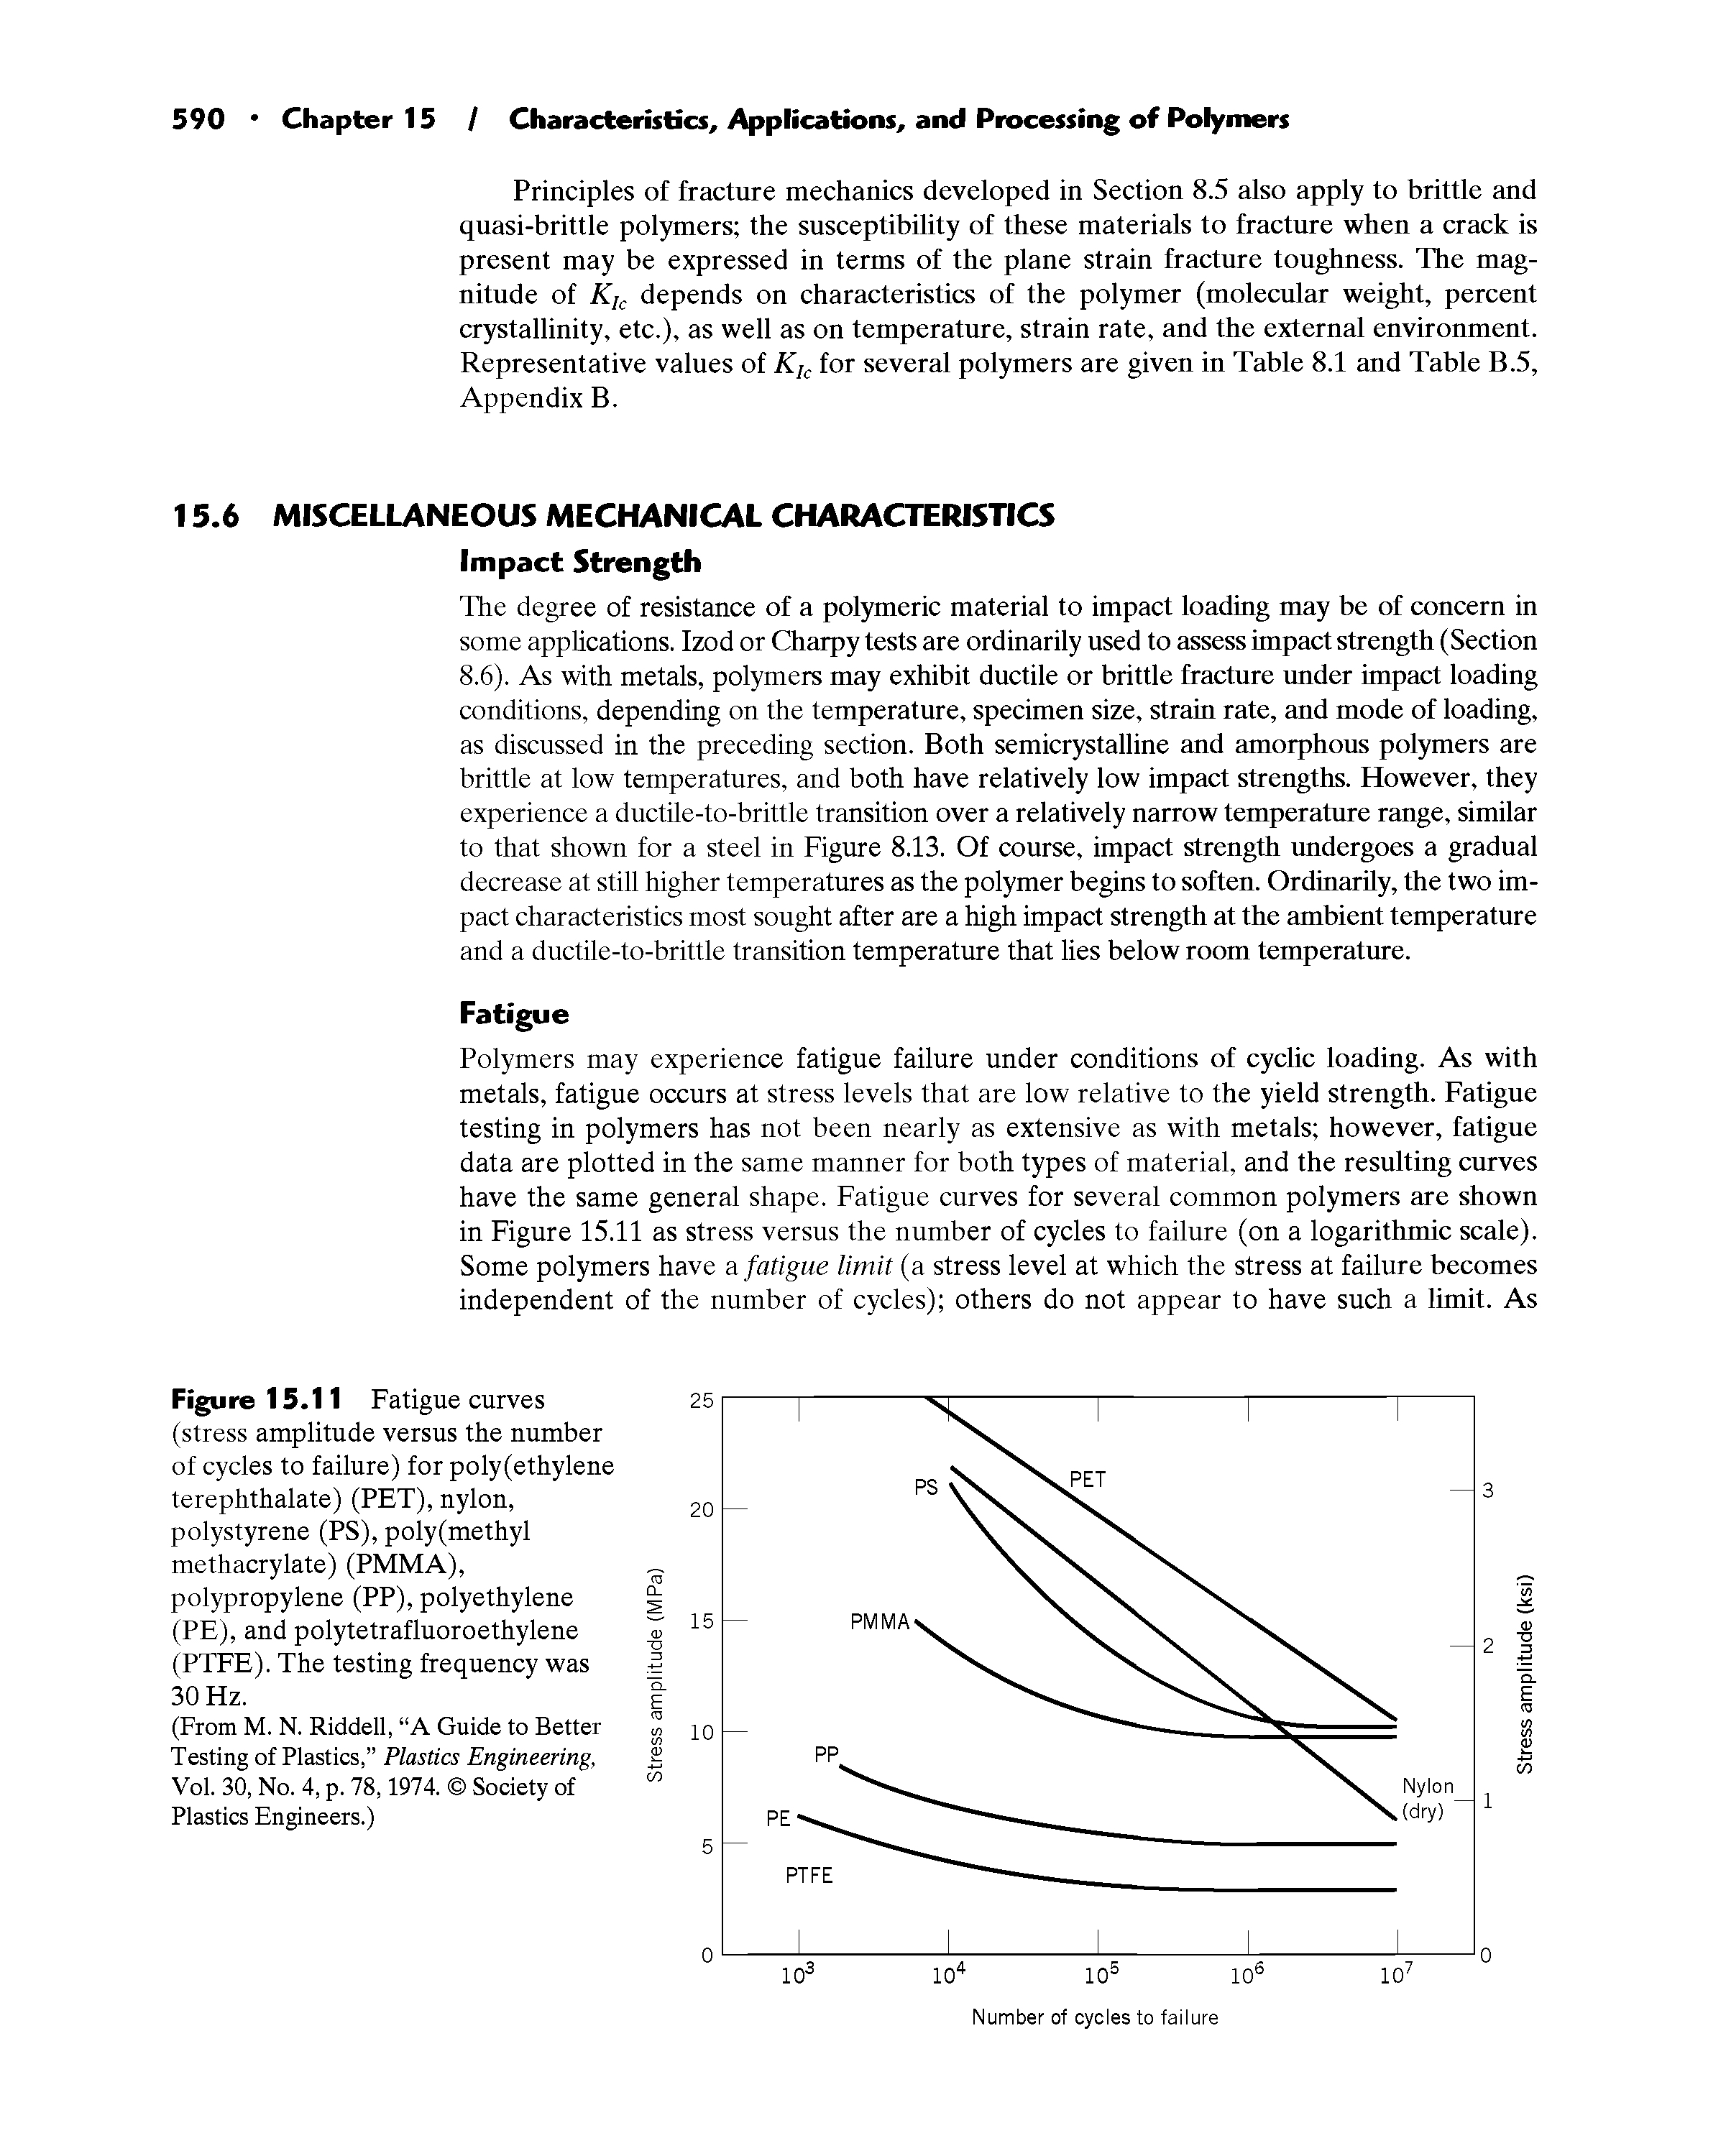 Figure 15.11 Fatigue curves (stress amplitude versus the number of cycles to failure) for poly(ethylene terephthalate) (PET), nylon, polystyrene (PS), poly(methyl methacrylate) (PMMA), polypropylene (PP), polyethylene (PE), and polytetrafluoroethylene (PTFE). The testing frequency was 30 Hz.